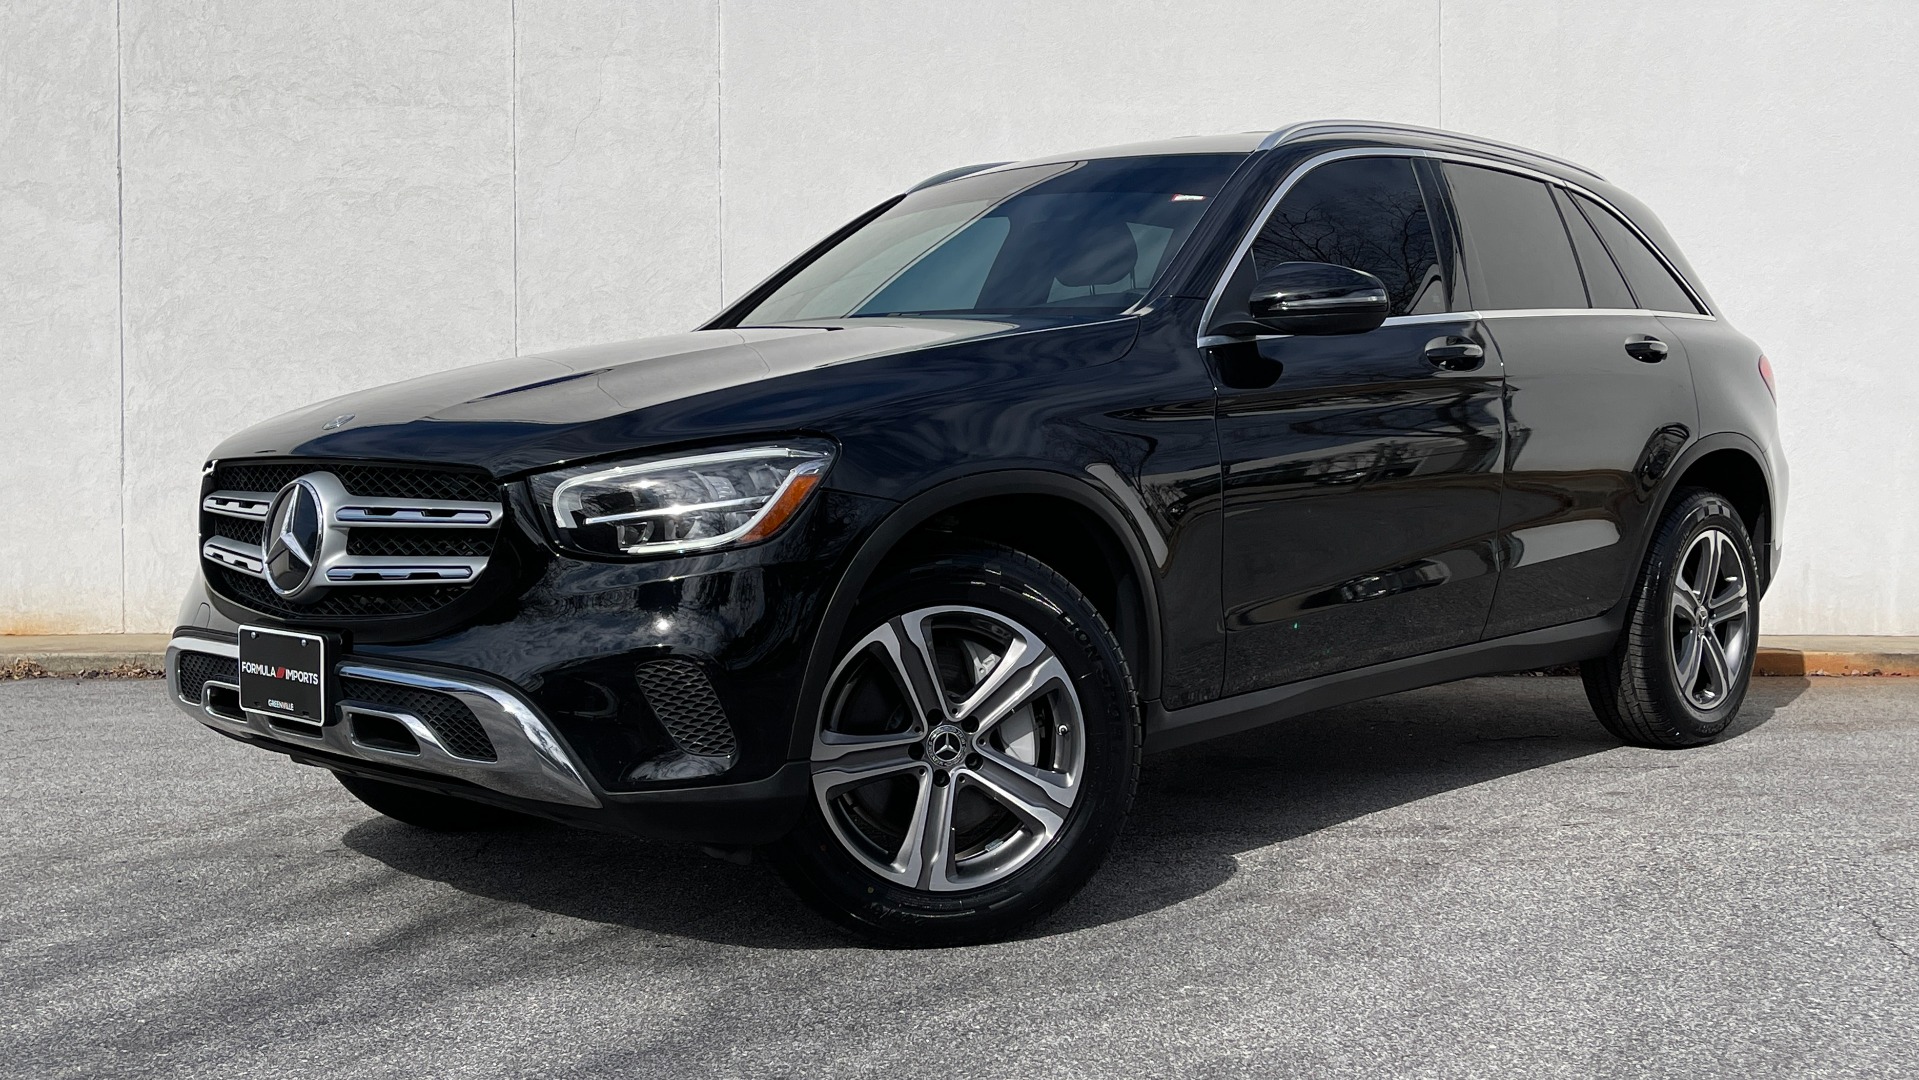 Used 2020 Mercedes-Benz GLC GLC 300 / AWD / 18IN WHEELS / LEATHER / WOOD TRIM for sale $34,995 at Formula Imports in Charlotte NC 28227 1